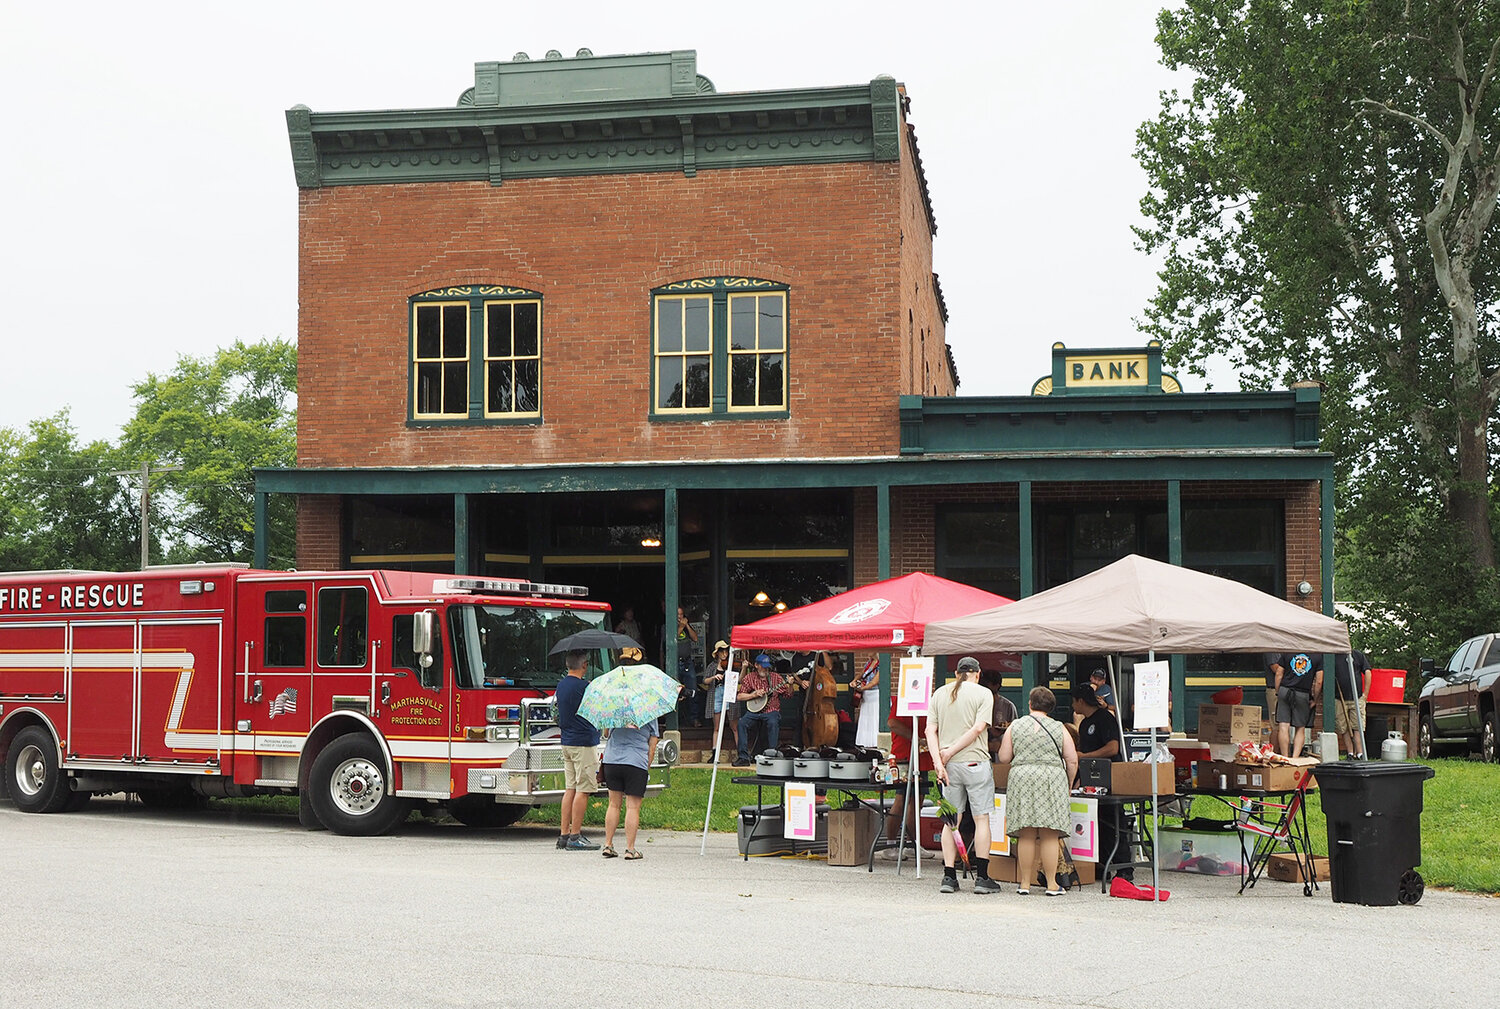 SWEET CORN FESTIVAL — Despite rain, sweet corn, brats and music were served up at the annual Sweet Corn Sunday near the historic Treloar Mercantile at the Katy Trail Sunday, Aug. 13. The event benefits the Marthasville Fire Protection District Auxiliary, whose focus is to provide new ventilation fans for the department. The event was sponsored by Magnificent Missouri.